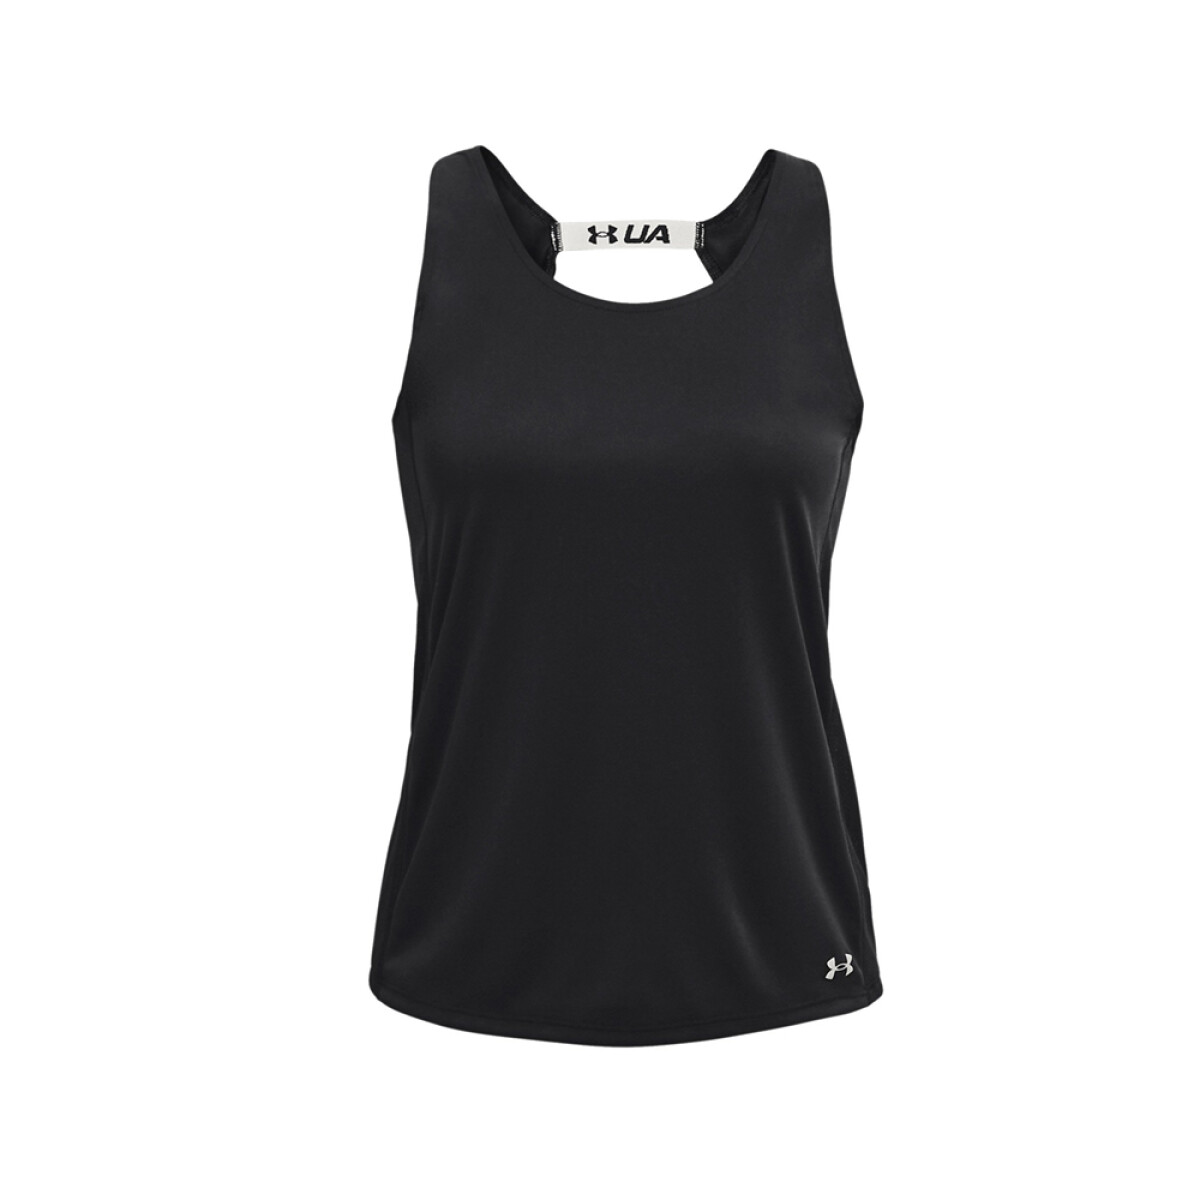 MUSCULOSA UNDER ARMOUR FLY BY TANK - Black 